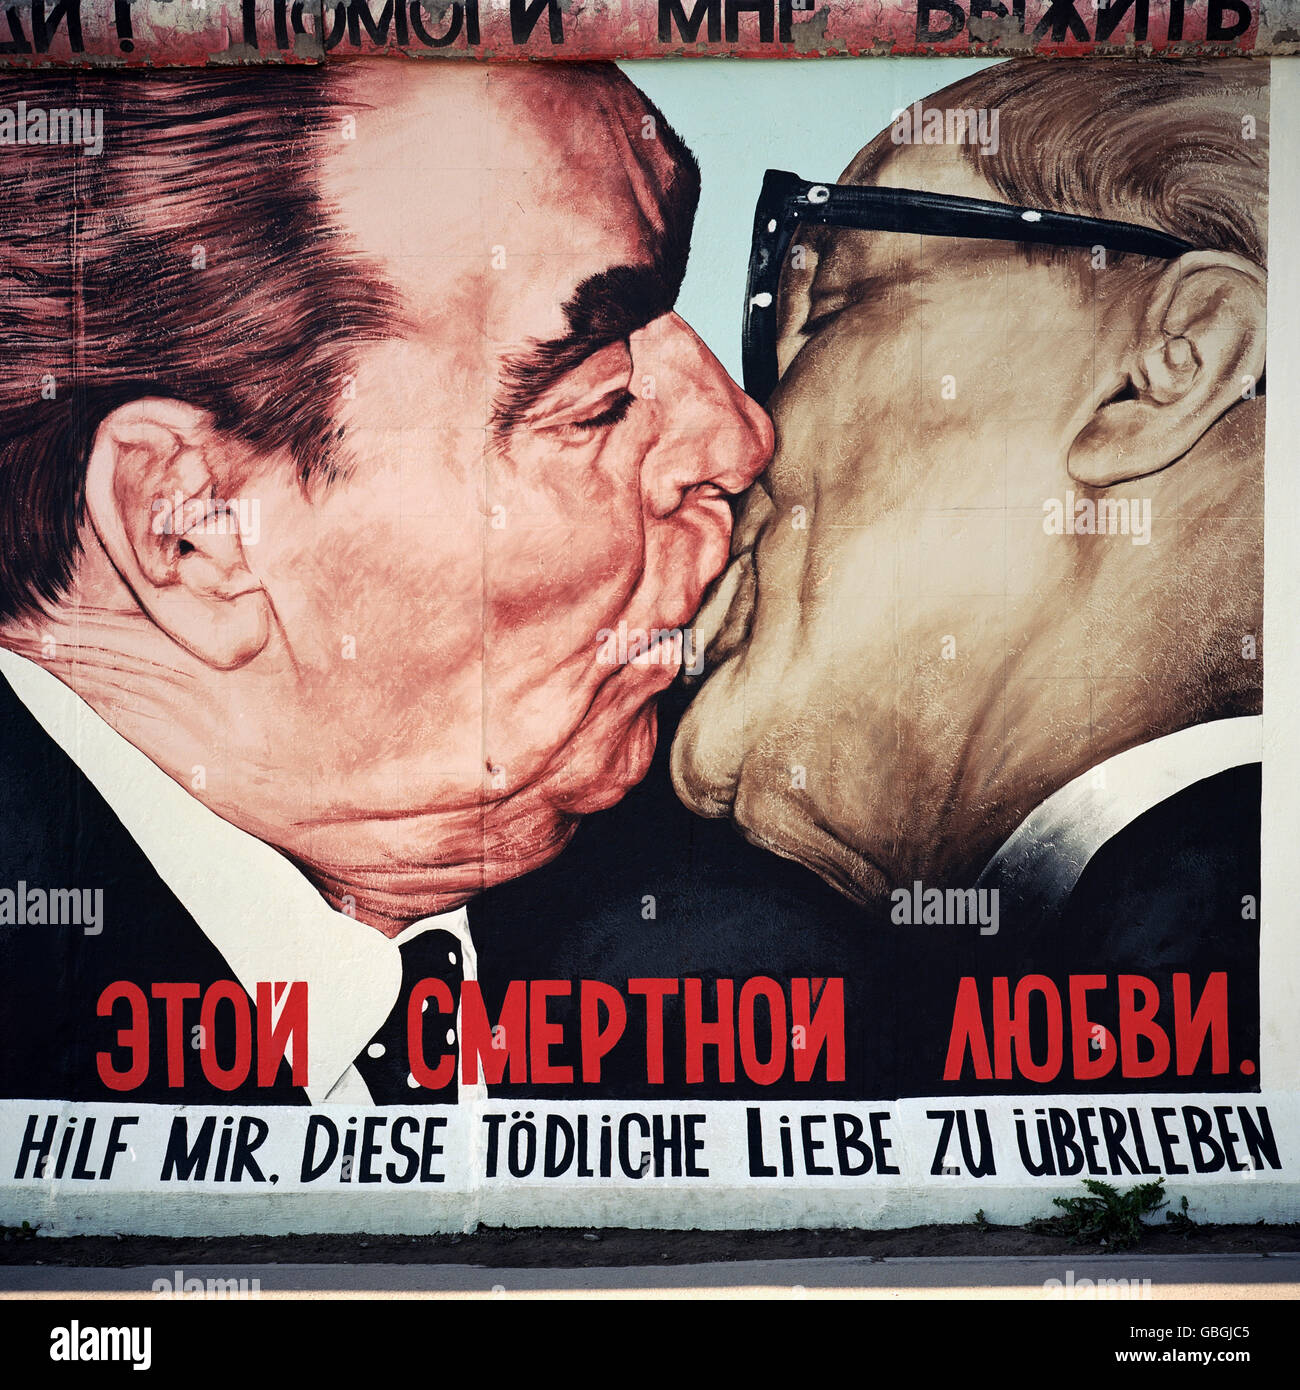 Berlin. Germany. Berlin Wall, The East Side Gallery. Caricature of Leonid Brezhnev & Erich Honecker kissing by artist Dmitri Vrubel. Stock Photo